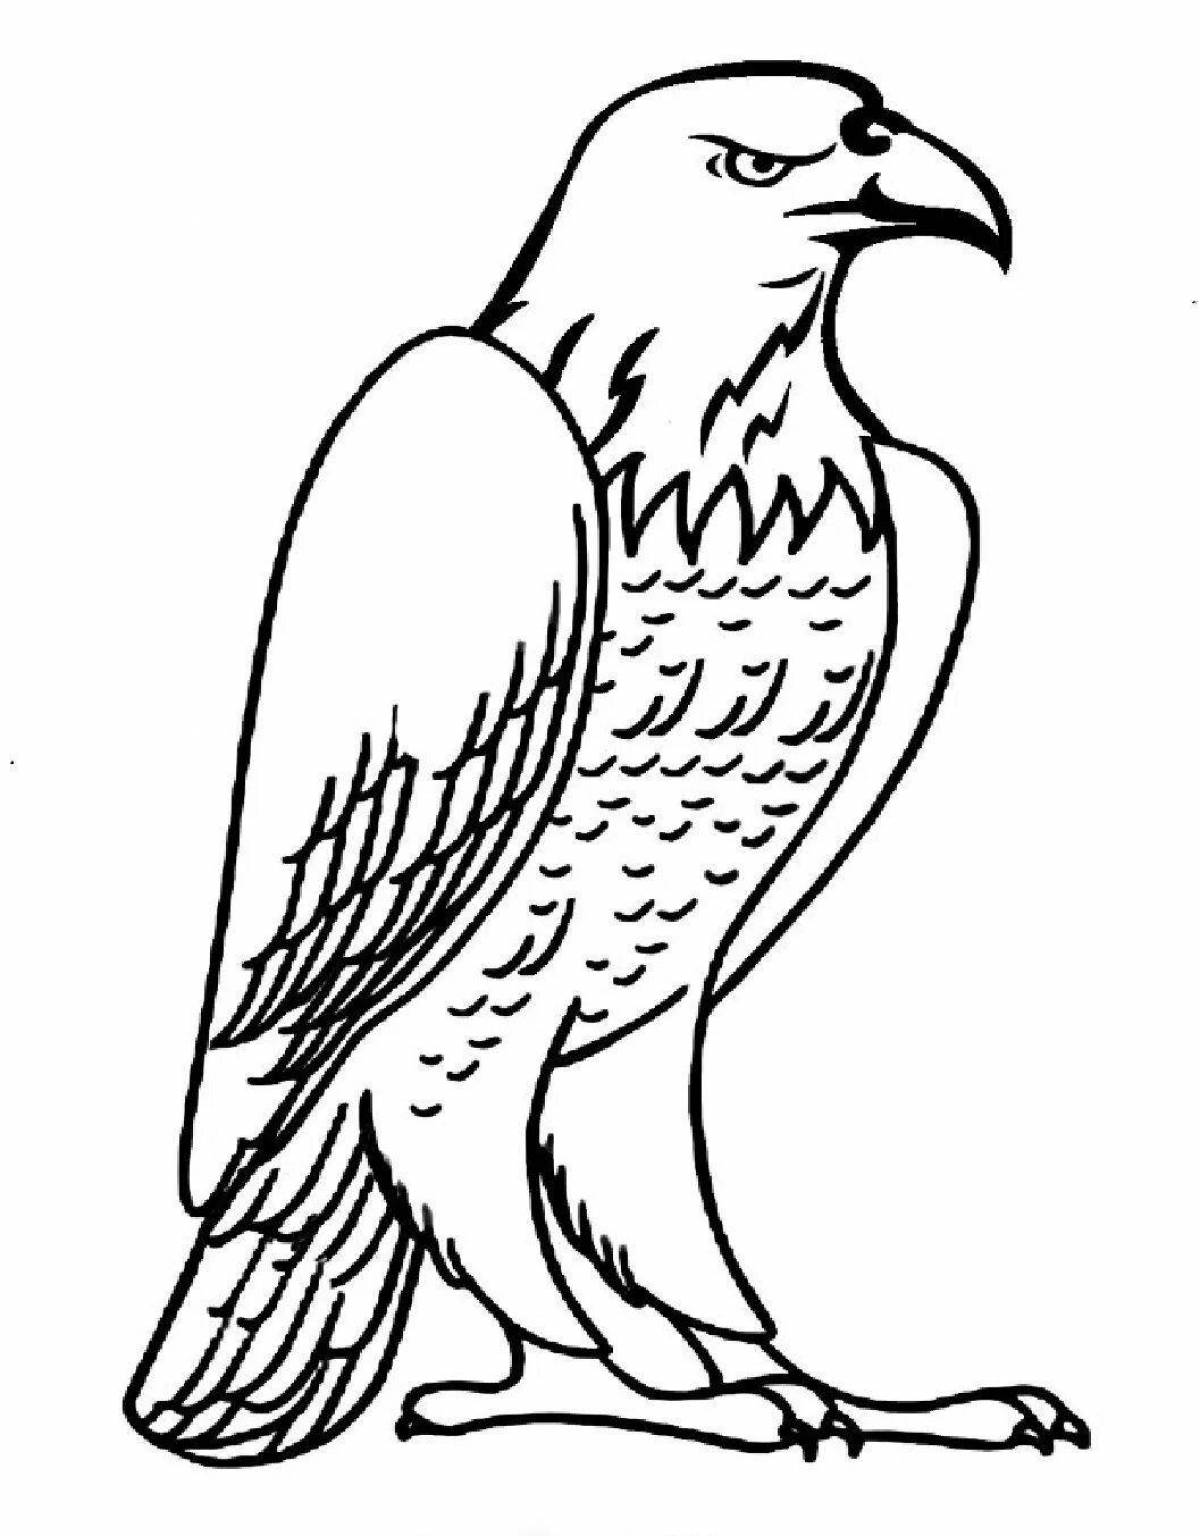 Glitter kite coloring page